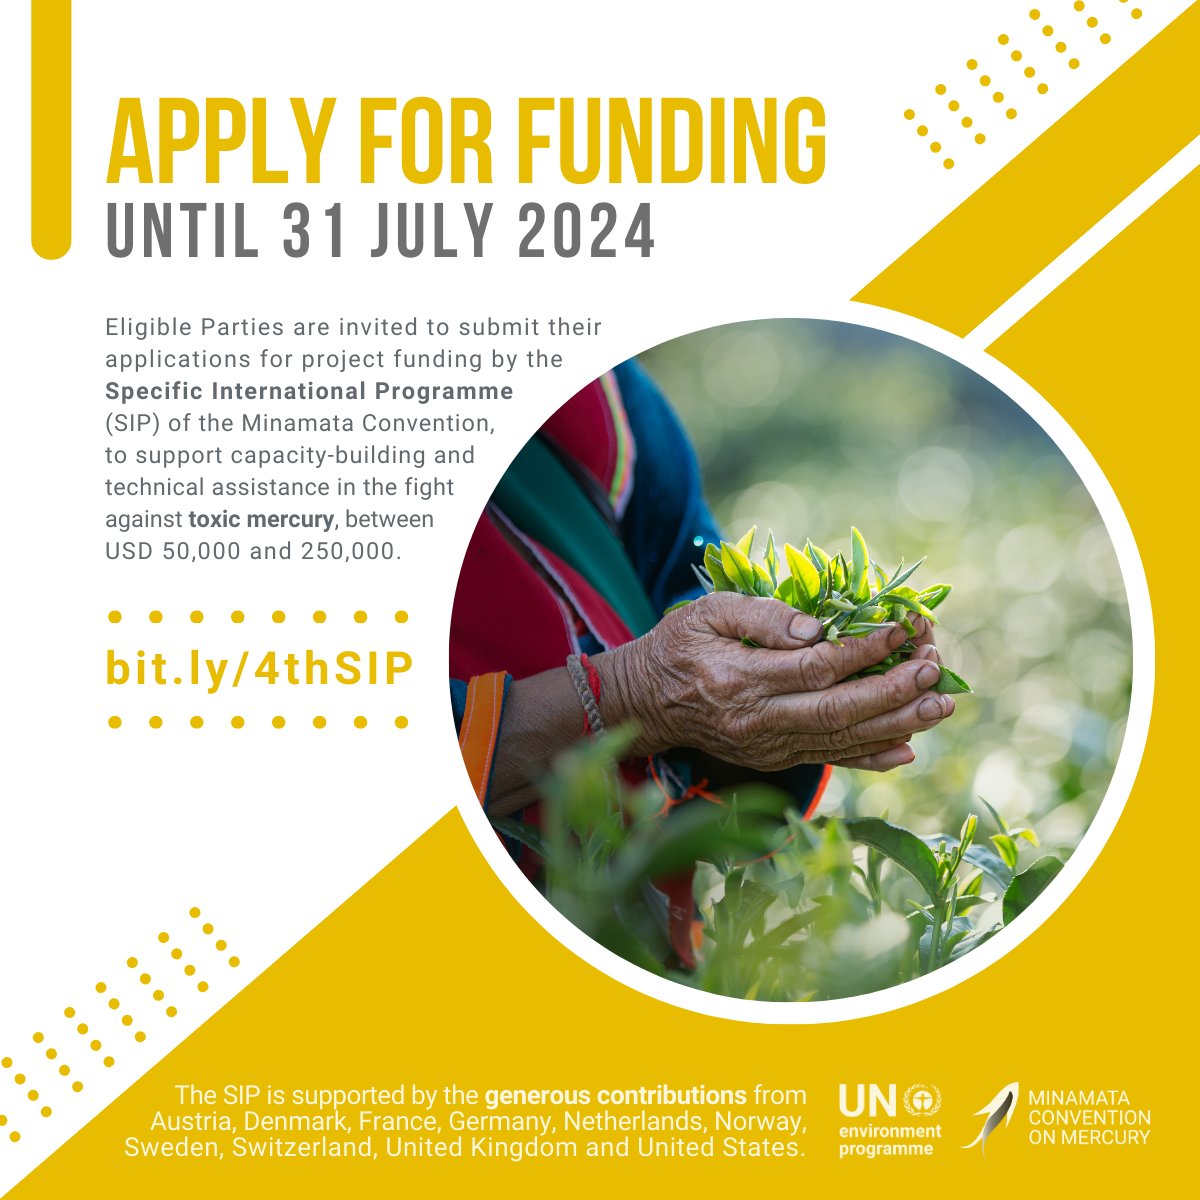 The Specific International Programme under the @MinamataMEA has launched its fourth round of funding. Eligible countries can apply by 31 July: minamataconvention.org/en/implementat…